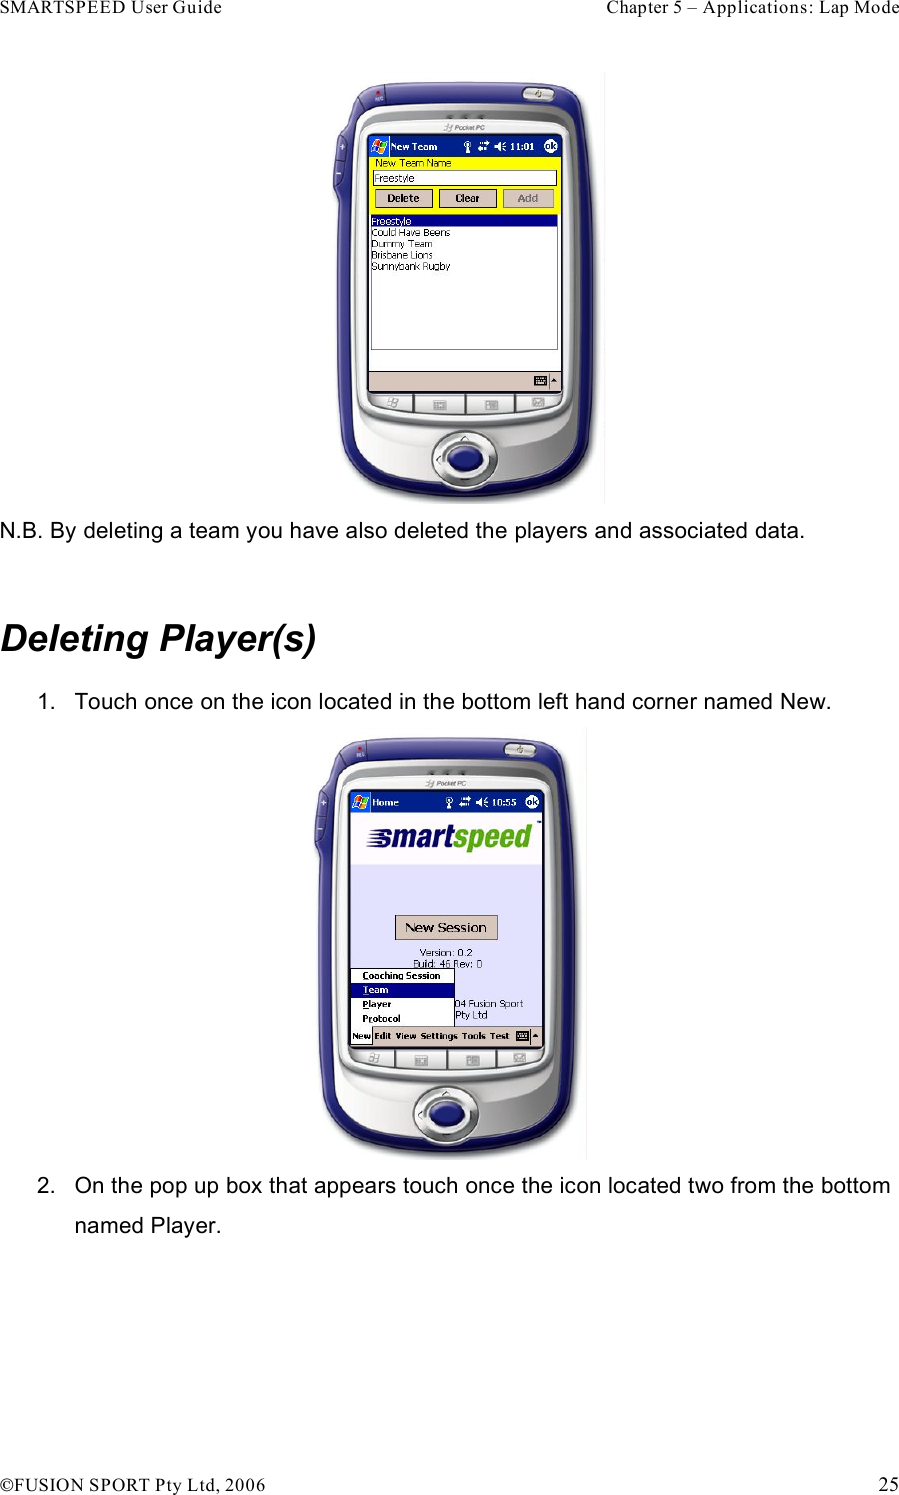 SMARTSPEED User Guide    Chapter 5 – Applications: Lap Mode !FUSION SPORT Pty Ltd, 2006    25  N.B. By deleting a team you have also deleted the players and associated data.  Deleting Player(s) 1.  Touch once on the icon located in the bottom left hand corner named New.  2.  On the pop up box that appears touch once the icon located two from the bottom named Player.  